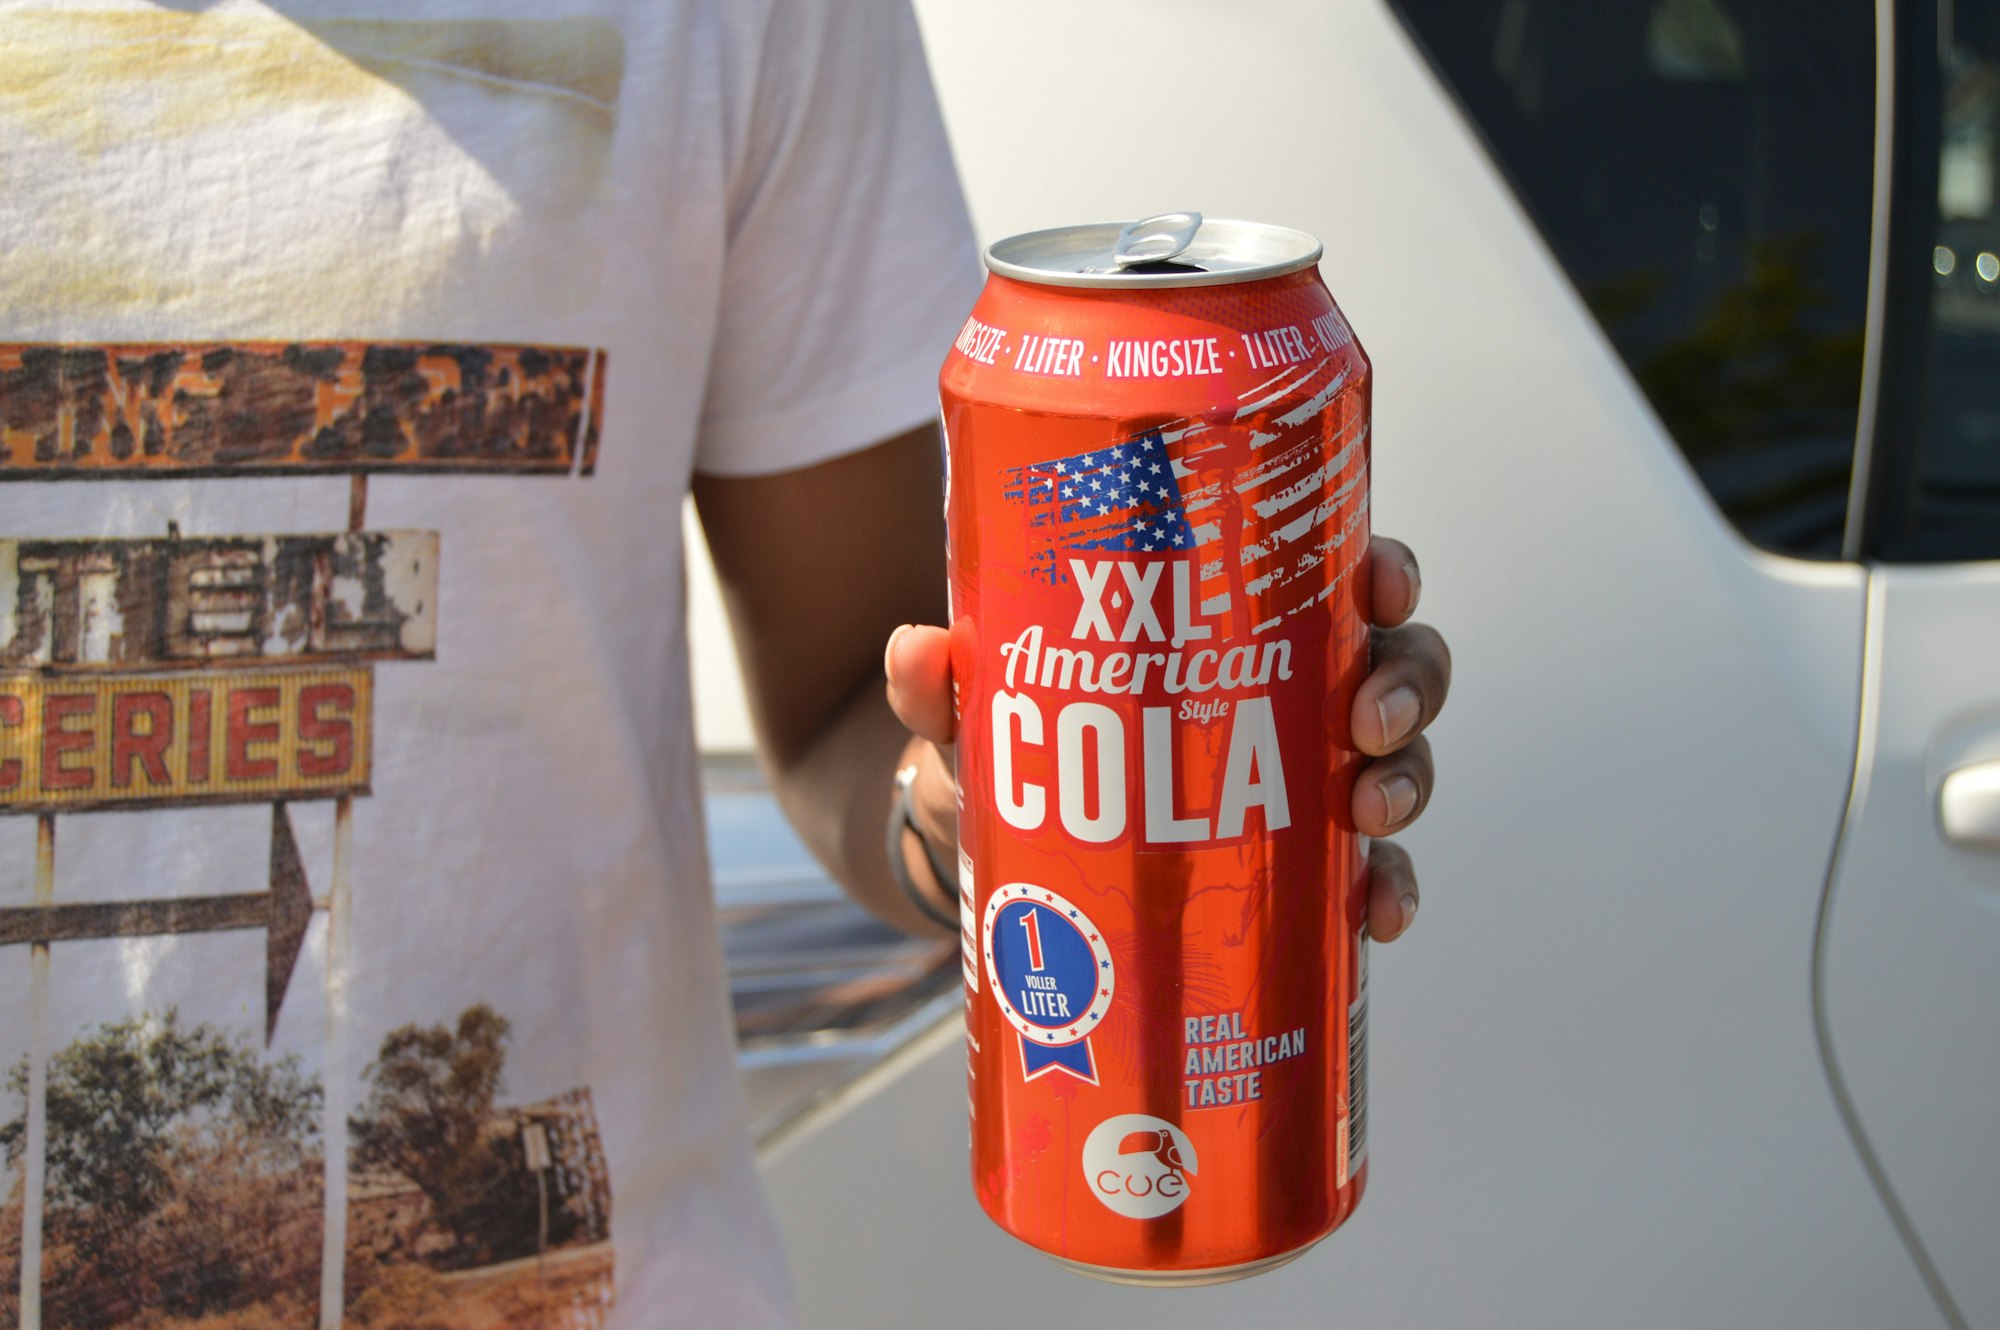 Extra large American Cola is full of sugar